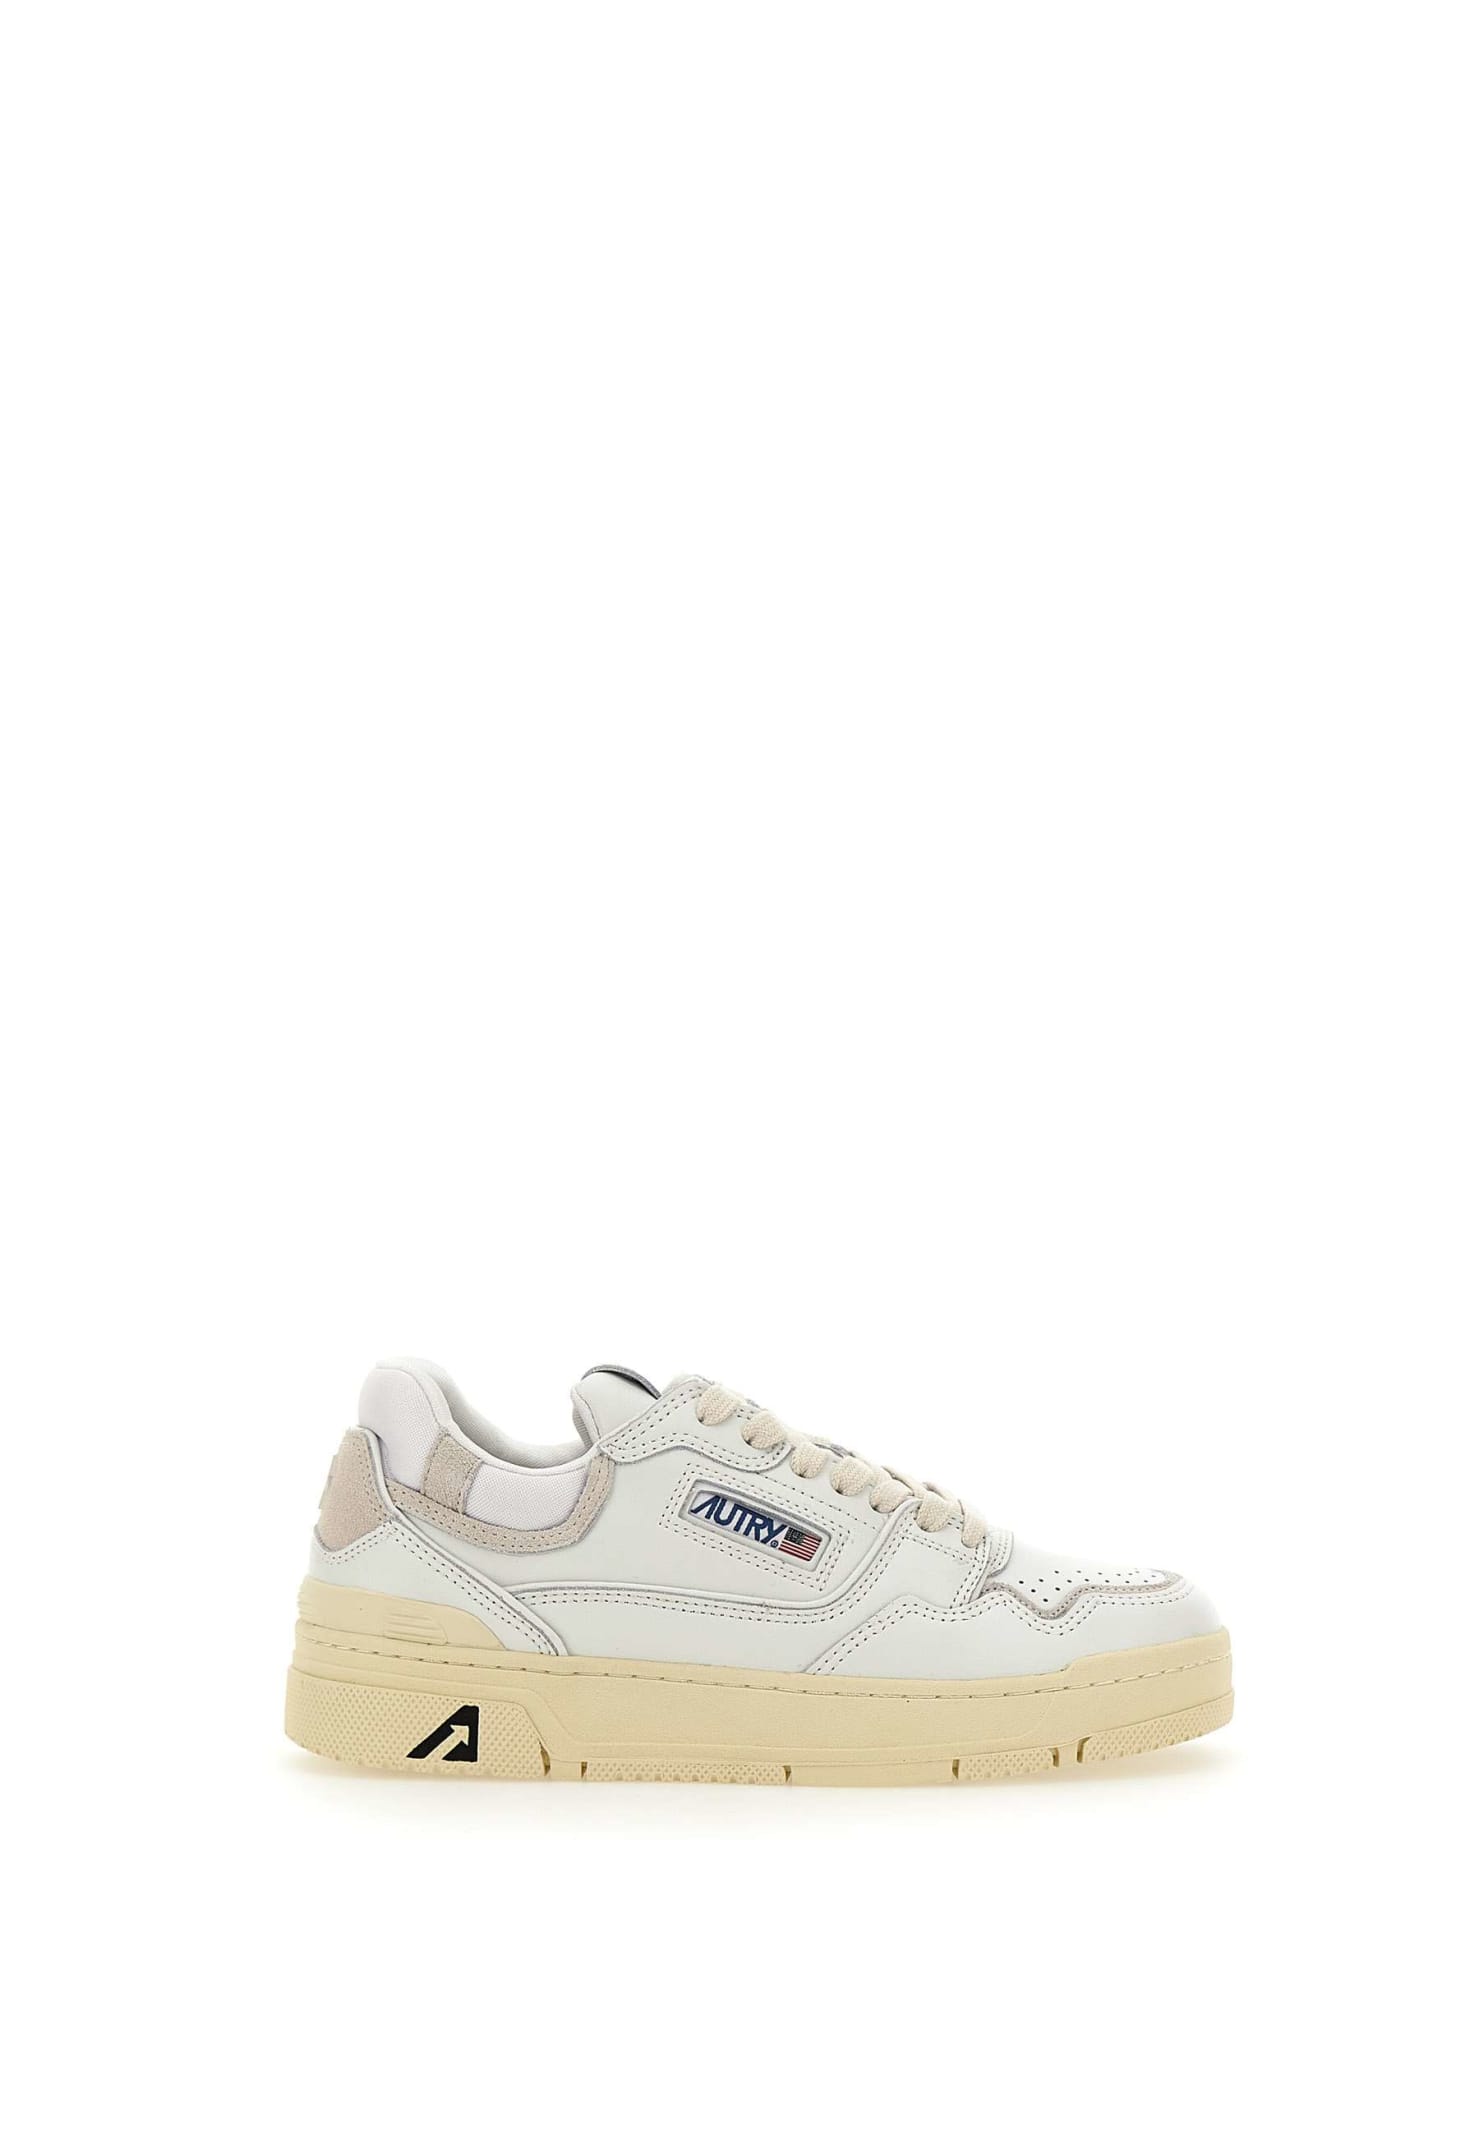 Autry Rolw Mm15 Cowhide Sneakers In White